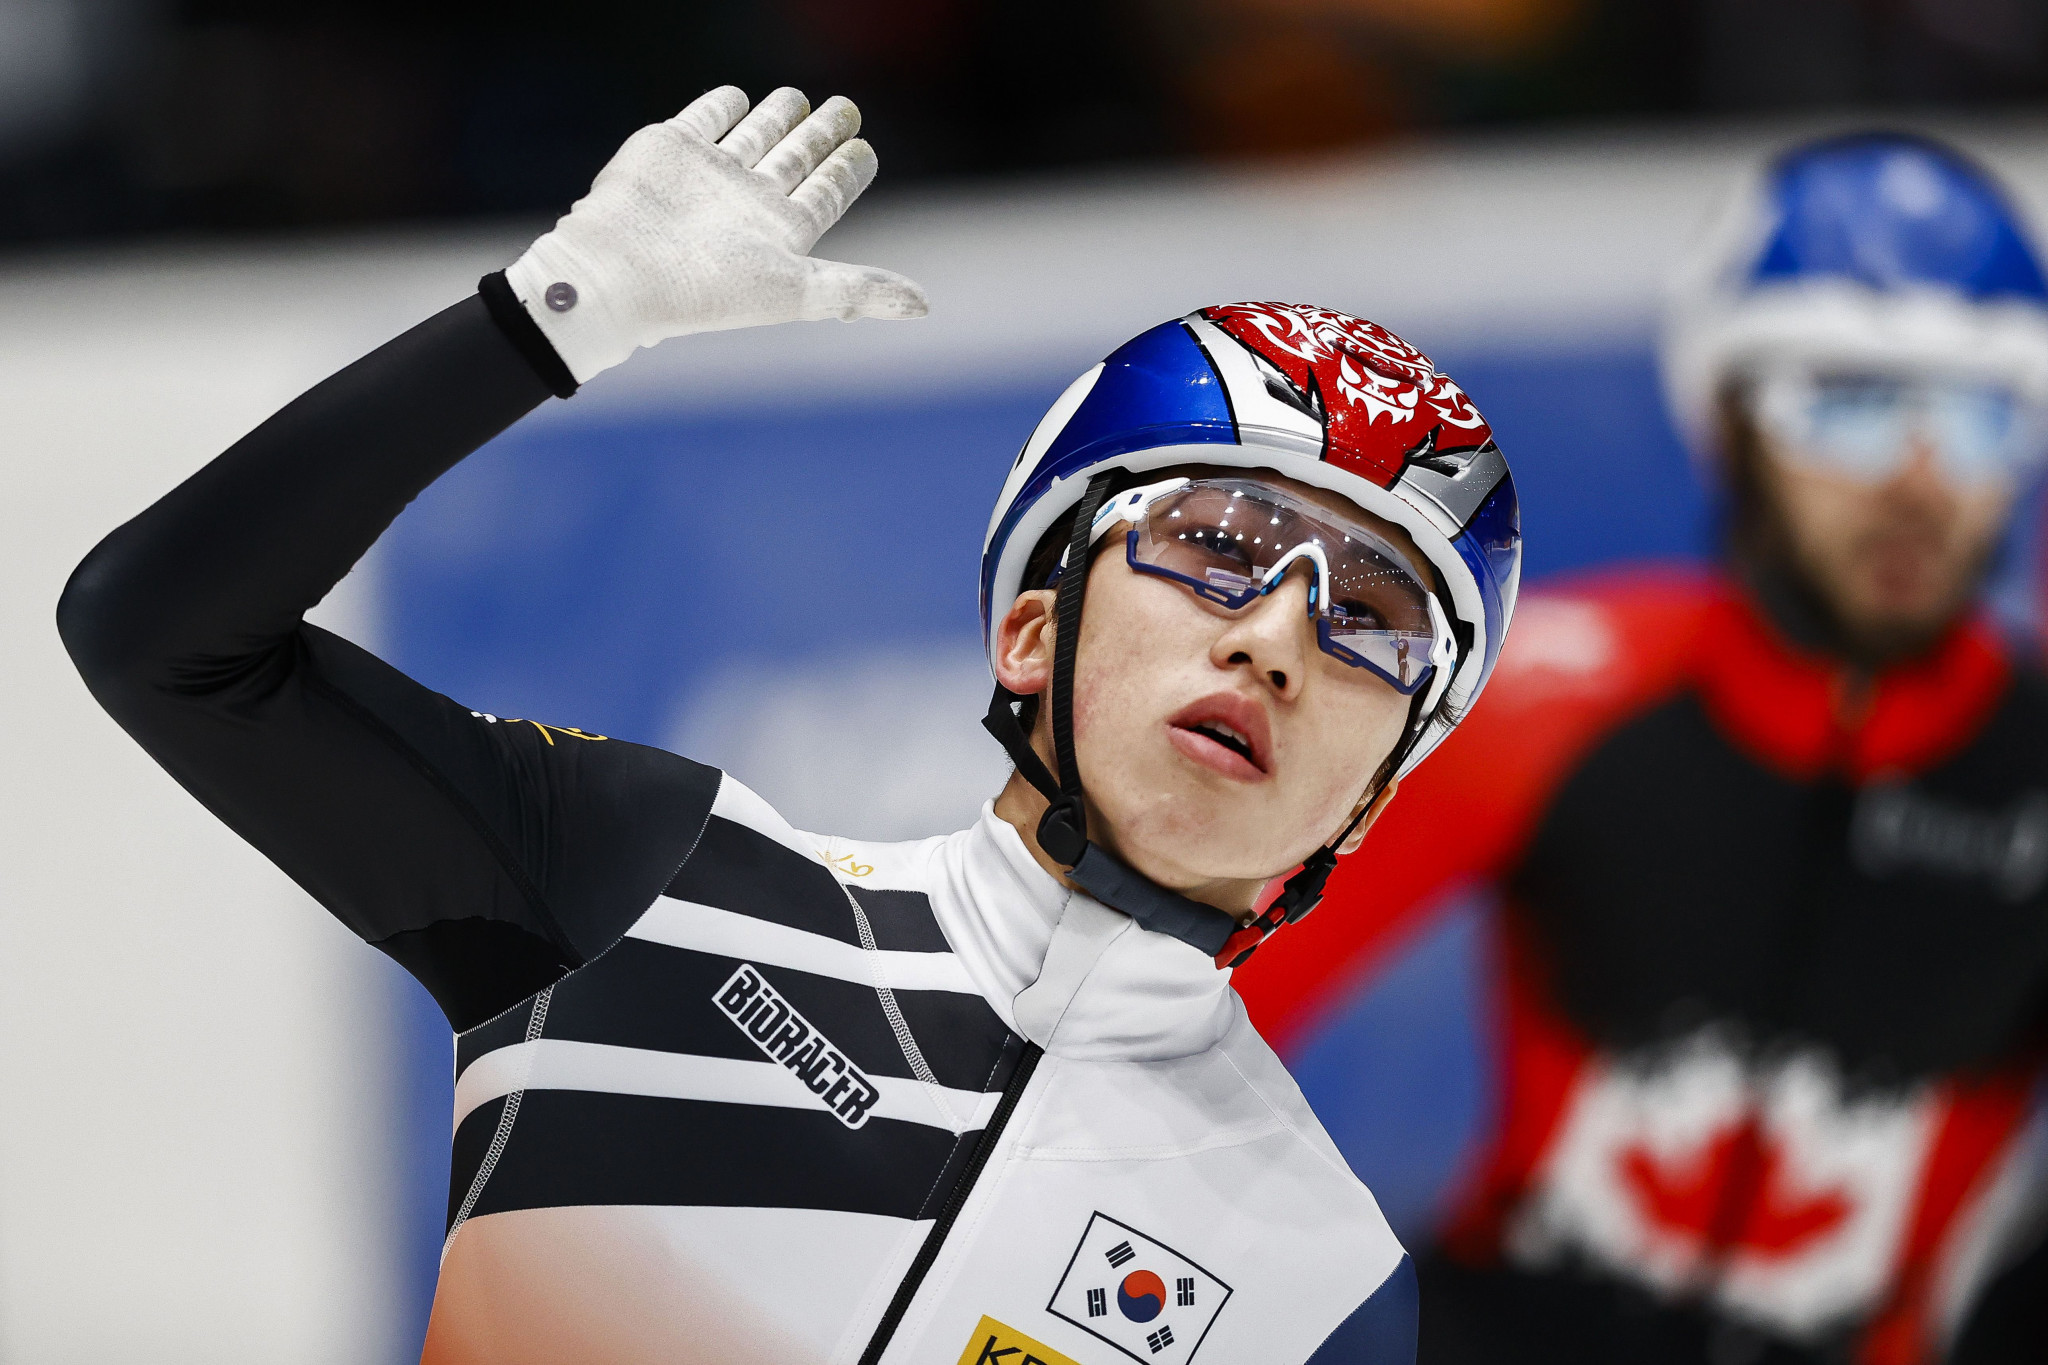 South Korea win 1500m titles at ISU Short Track Speed Skating World Cup in Dresden